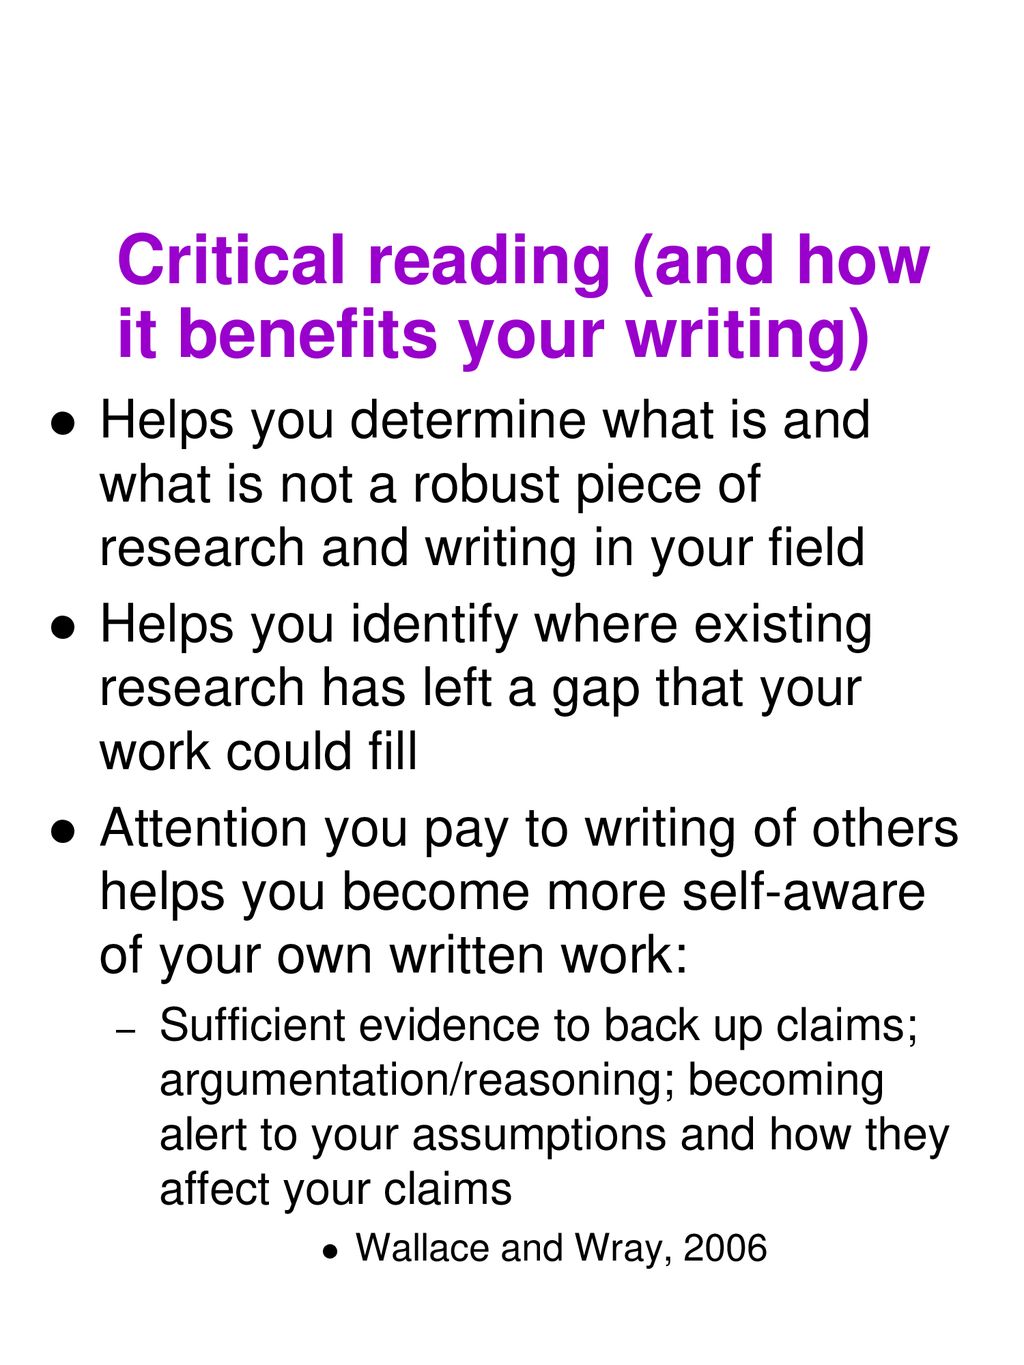 Approaches to critical reading and writing - ppt download